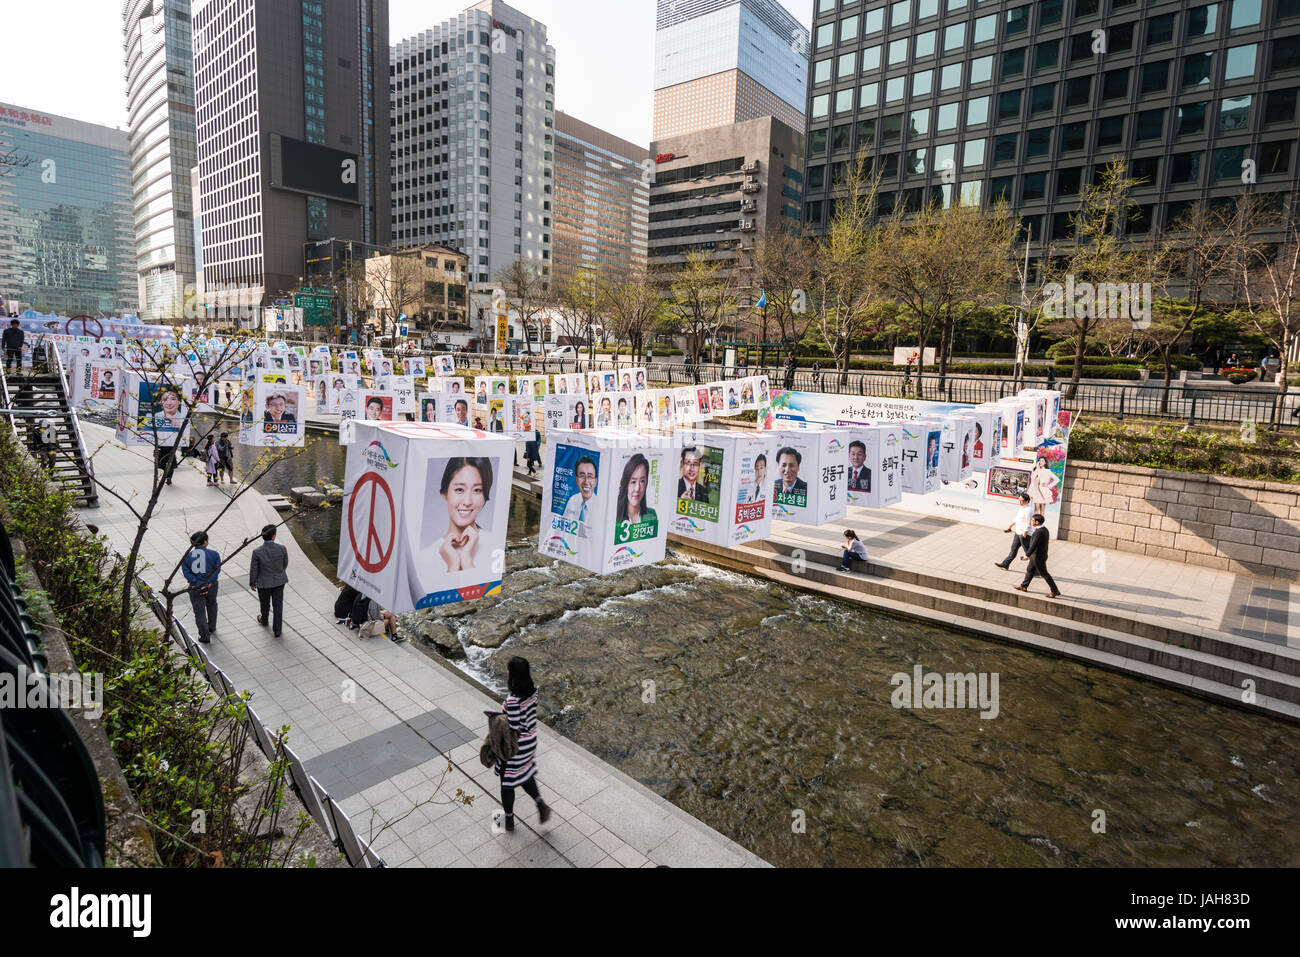 Photographs of candidates for Member of Parliament displayed over Cheonggyecheon stream, Seoul, South Korea Stock Photo